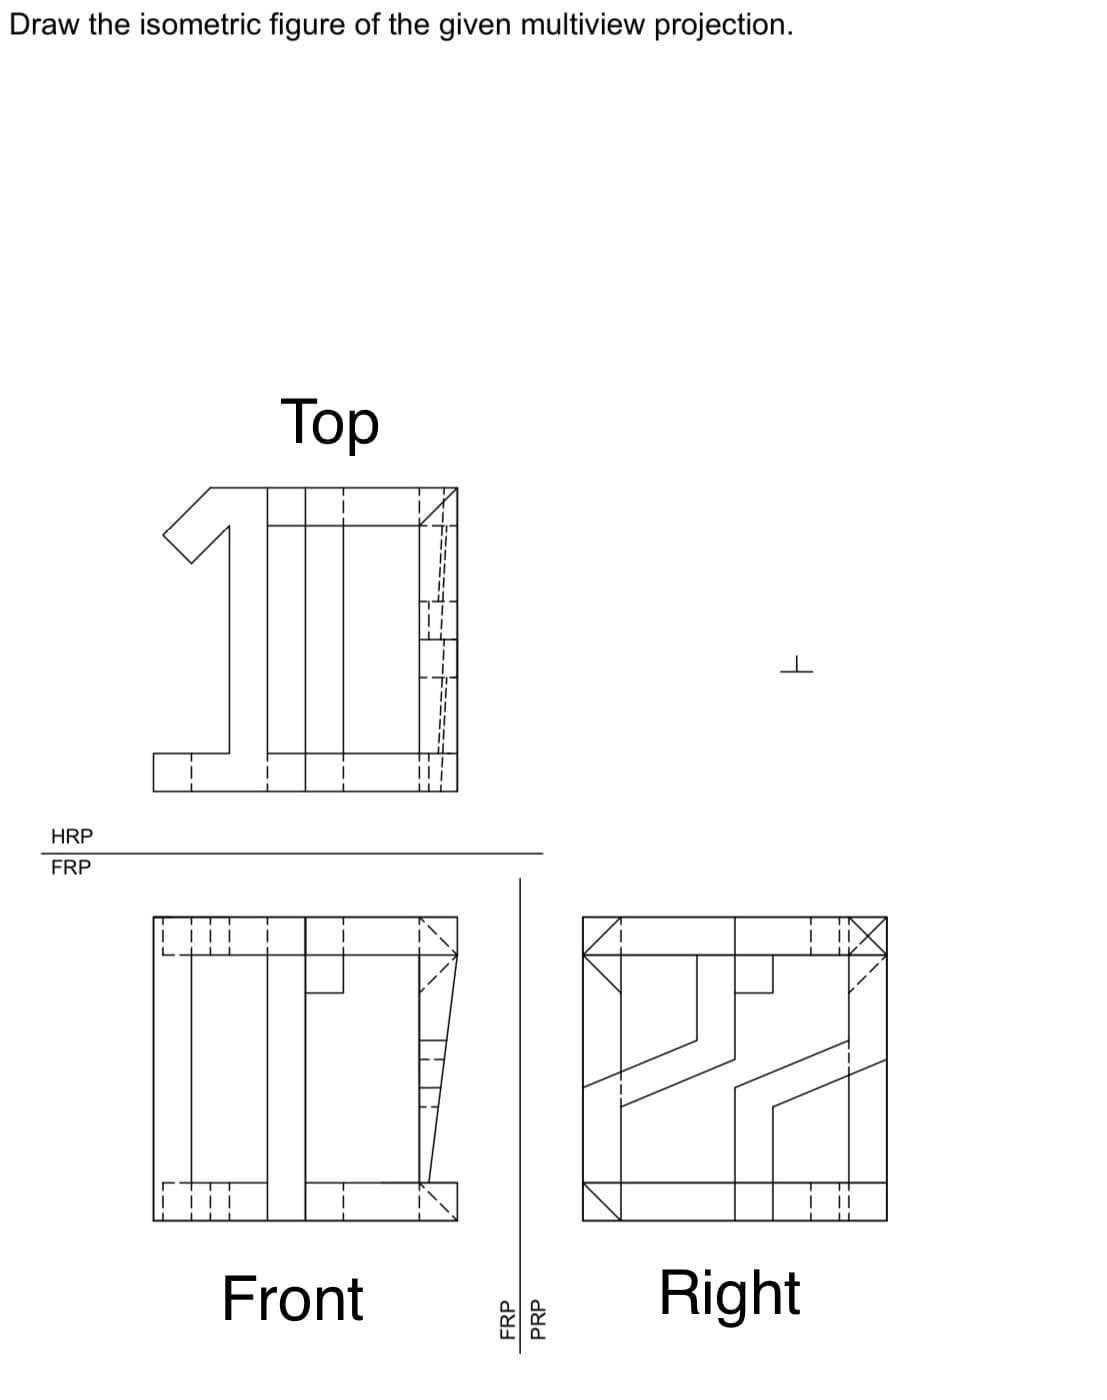 Draw the isometric figure of the given multiview projection.
Тоp
HRP
FRP
Front
Right
FRP
PRP
